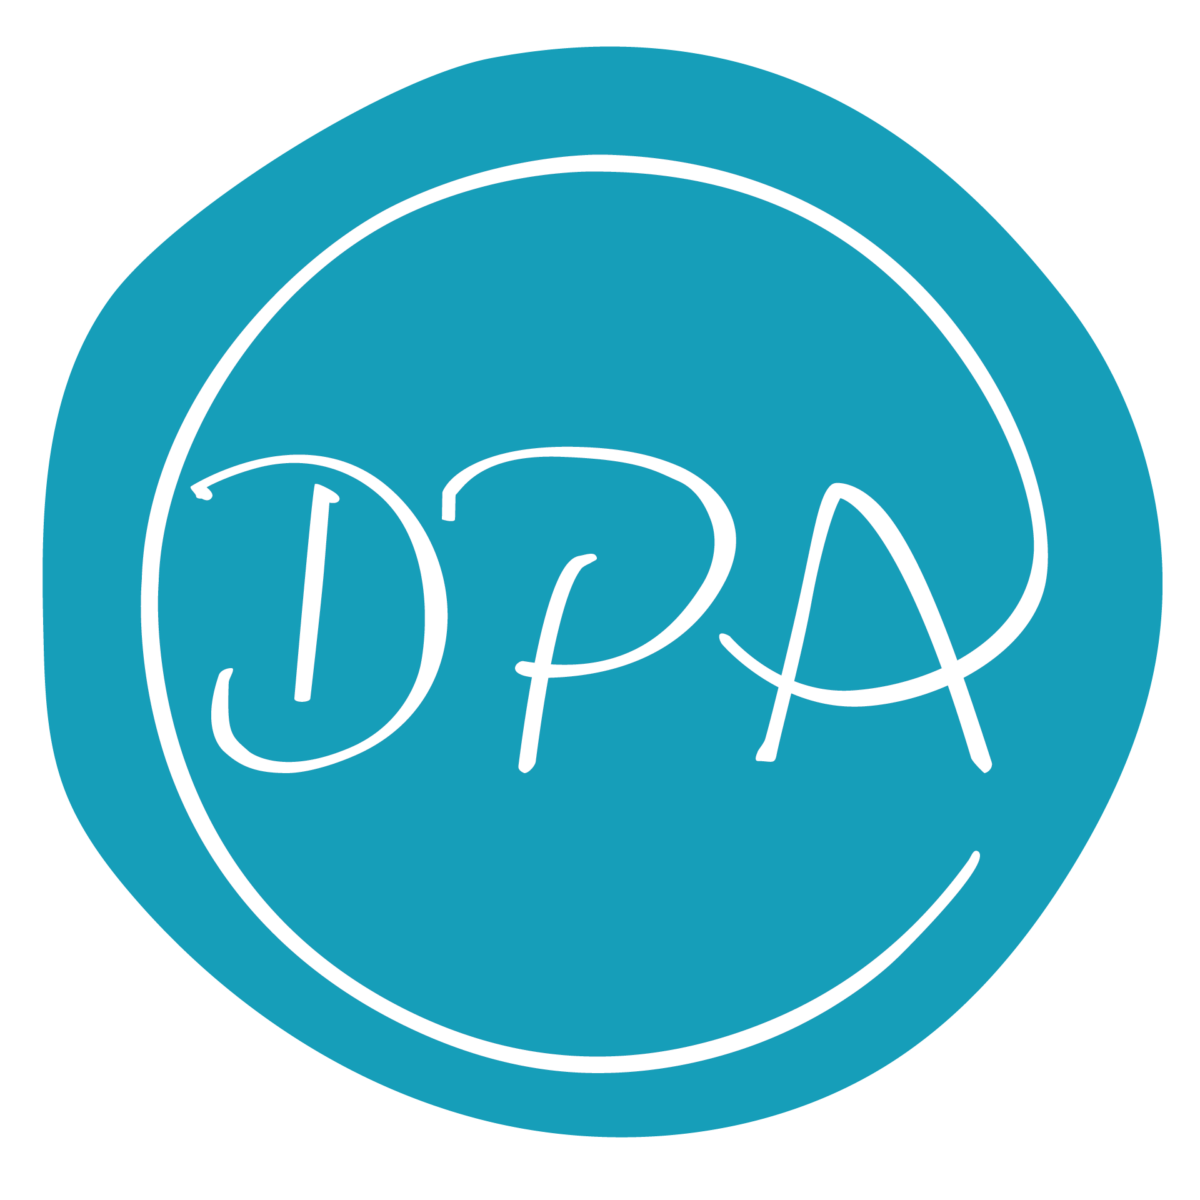 White DPA logo on solid blue background.